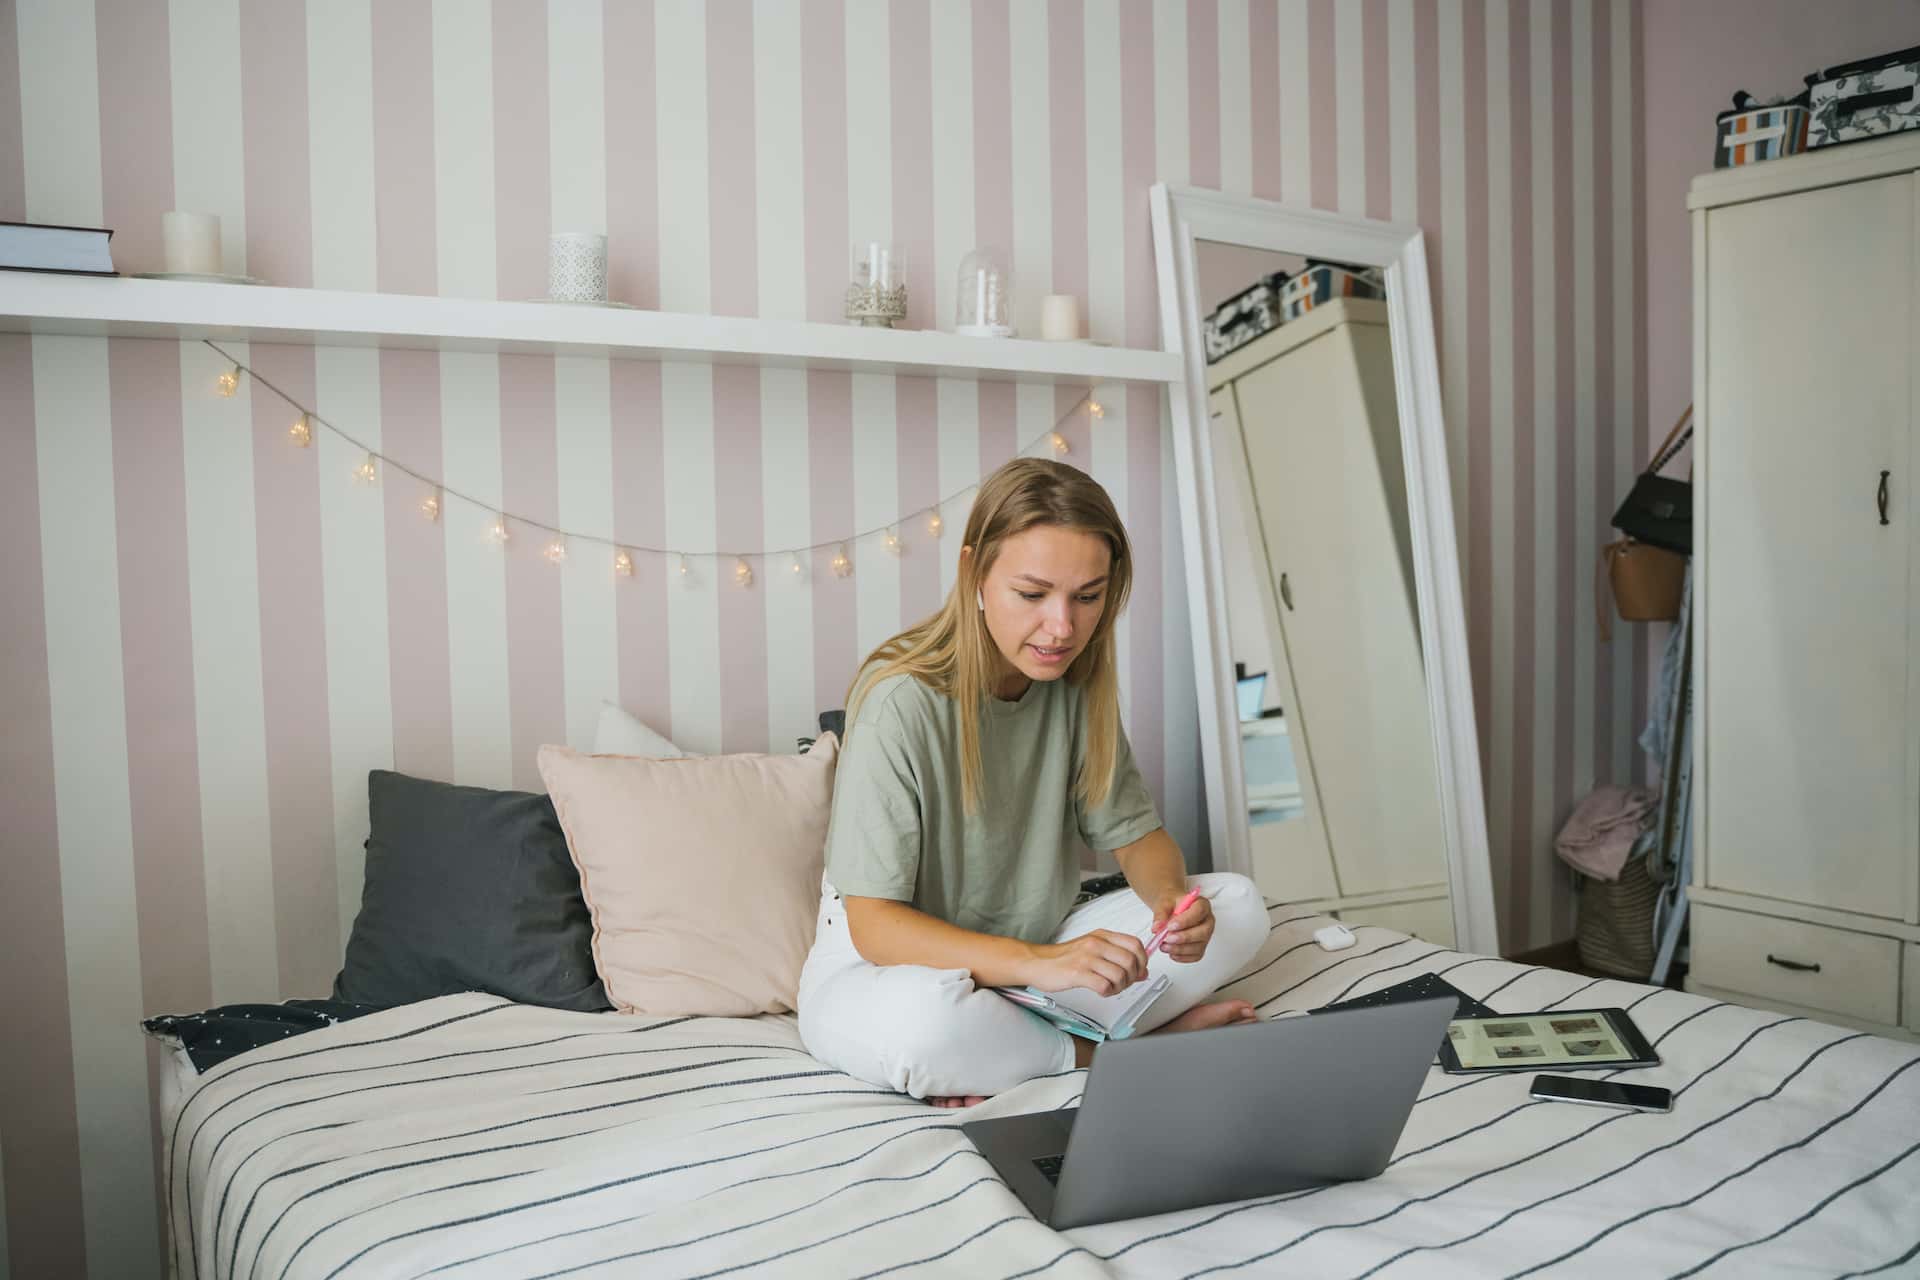 Blonde woman on bed with laptop